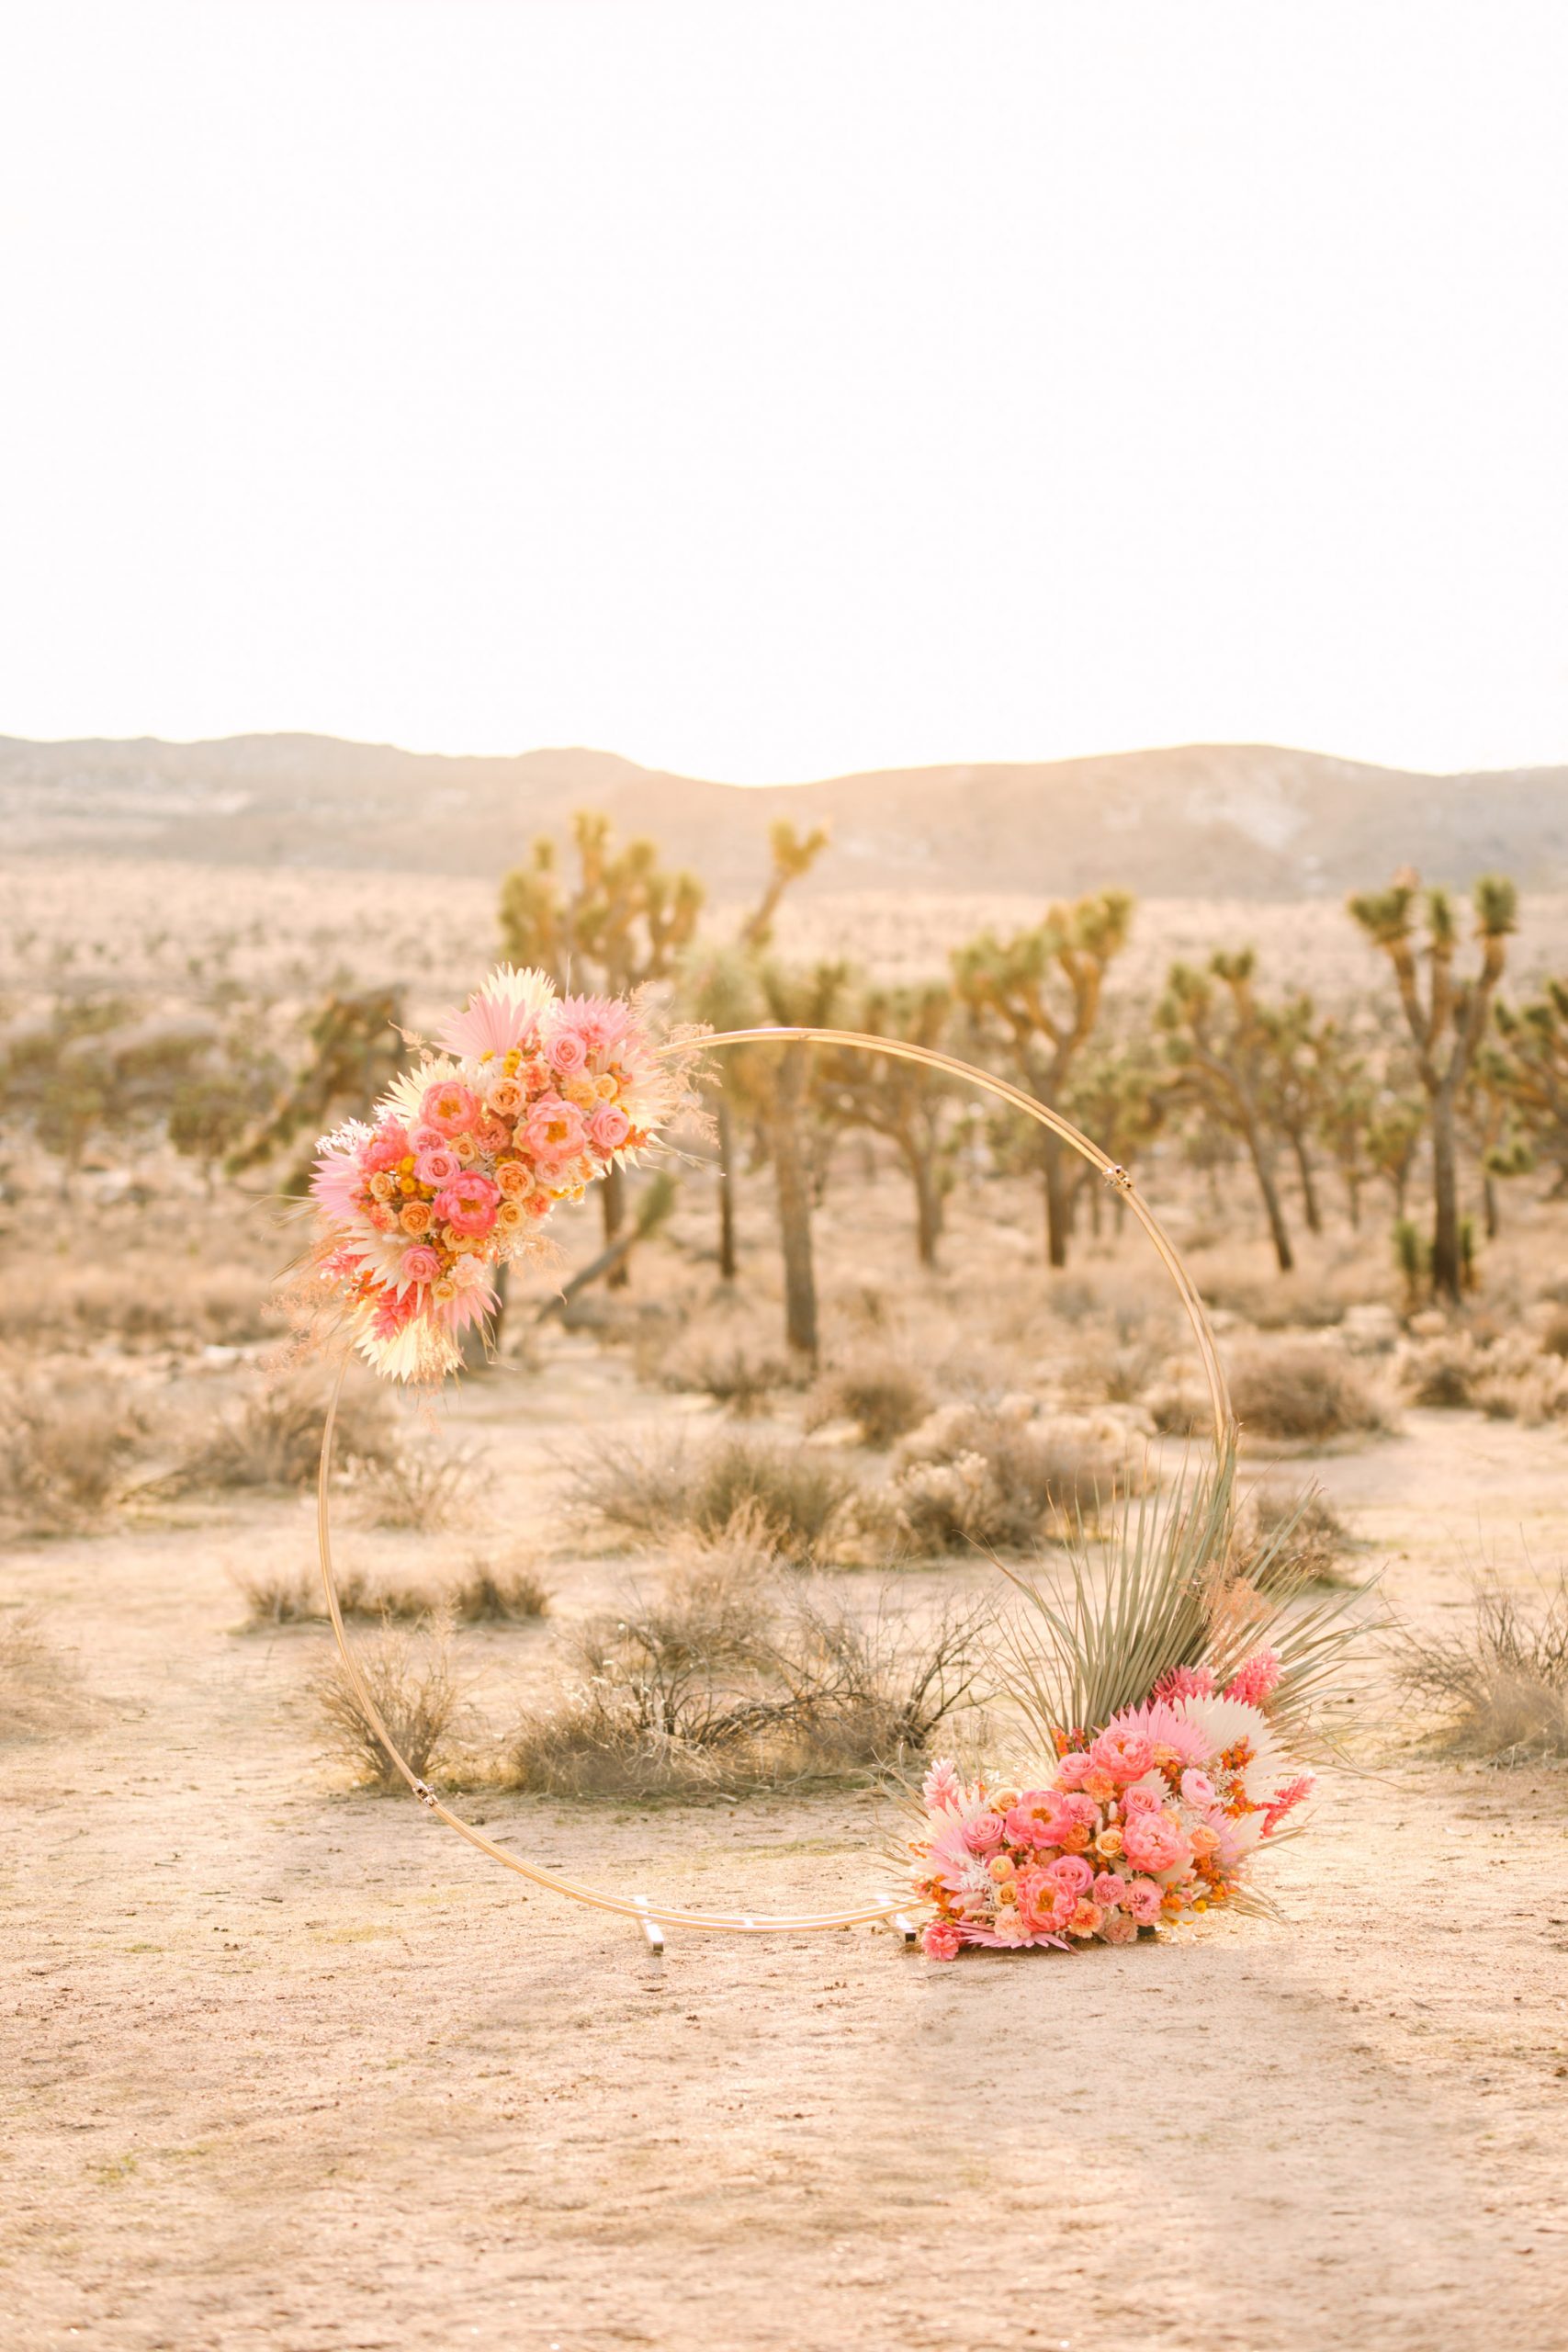 Pink floral circular arch in desert | Pink wedding dress Joshua Tree elopement featured on Green Wedding Shoes | Colorful desert wedding inspiration for fun-loving couples in Southern California #joshuatreewedding #joshuatreeelopement #pinkwedding #greenweddingshoes Source: Mary Costa Photography | Los Angeles